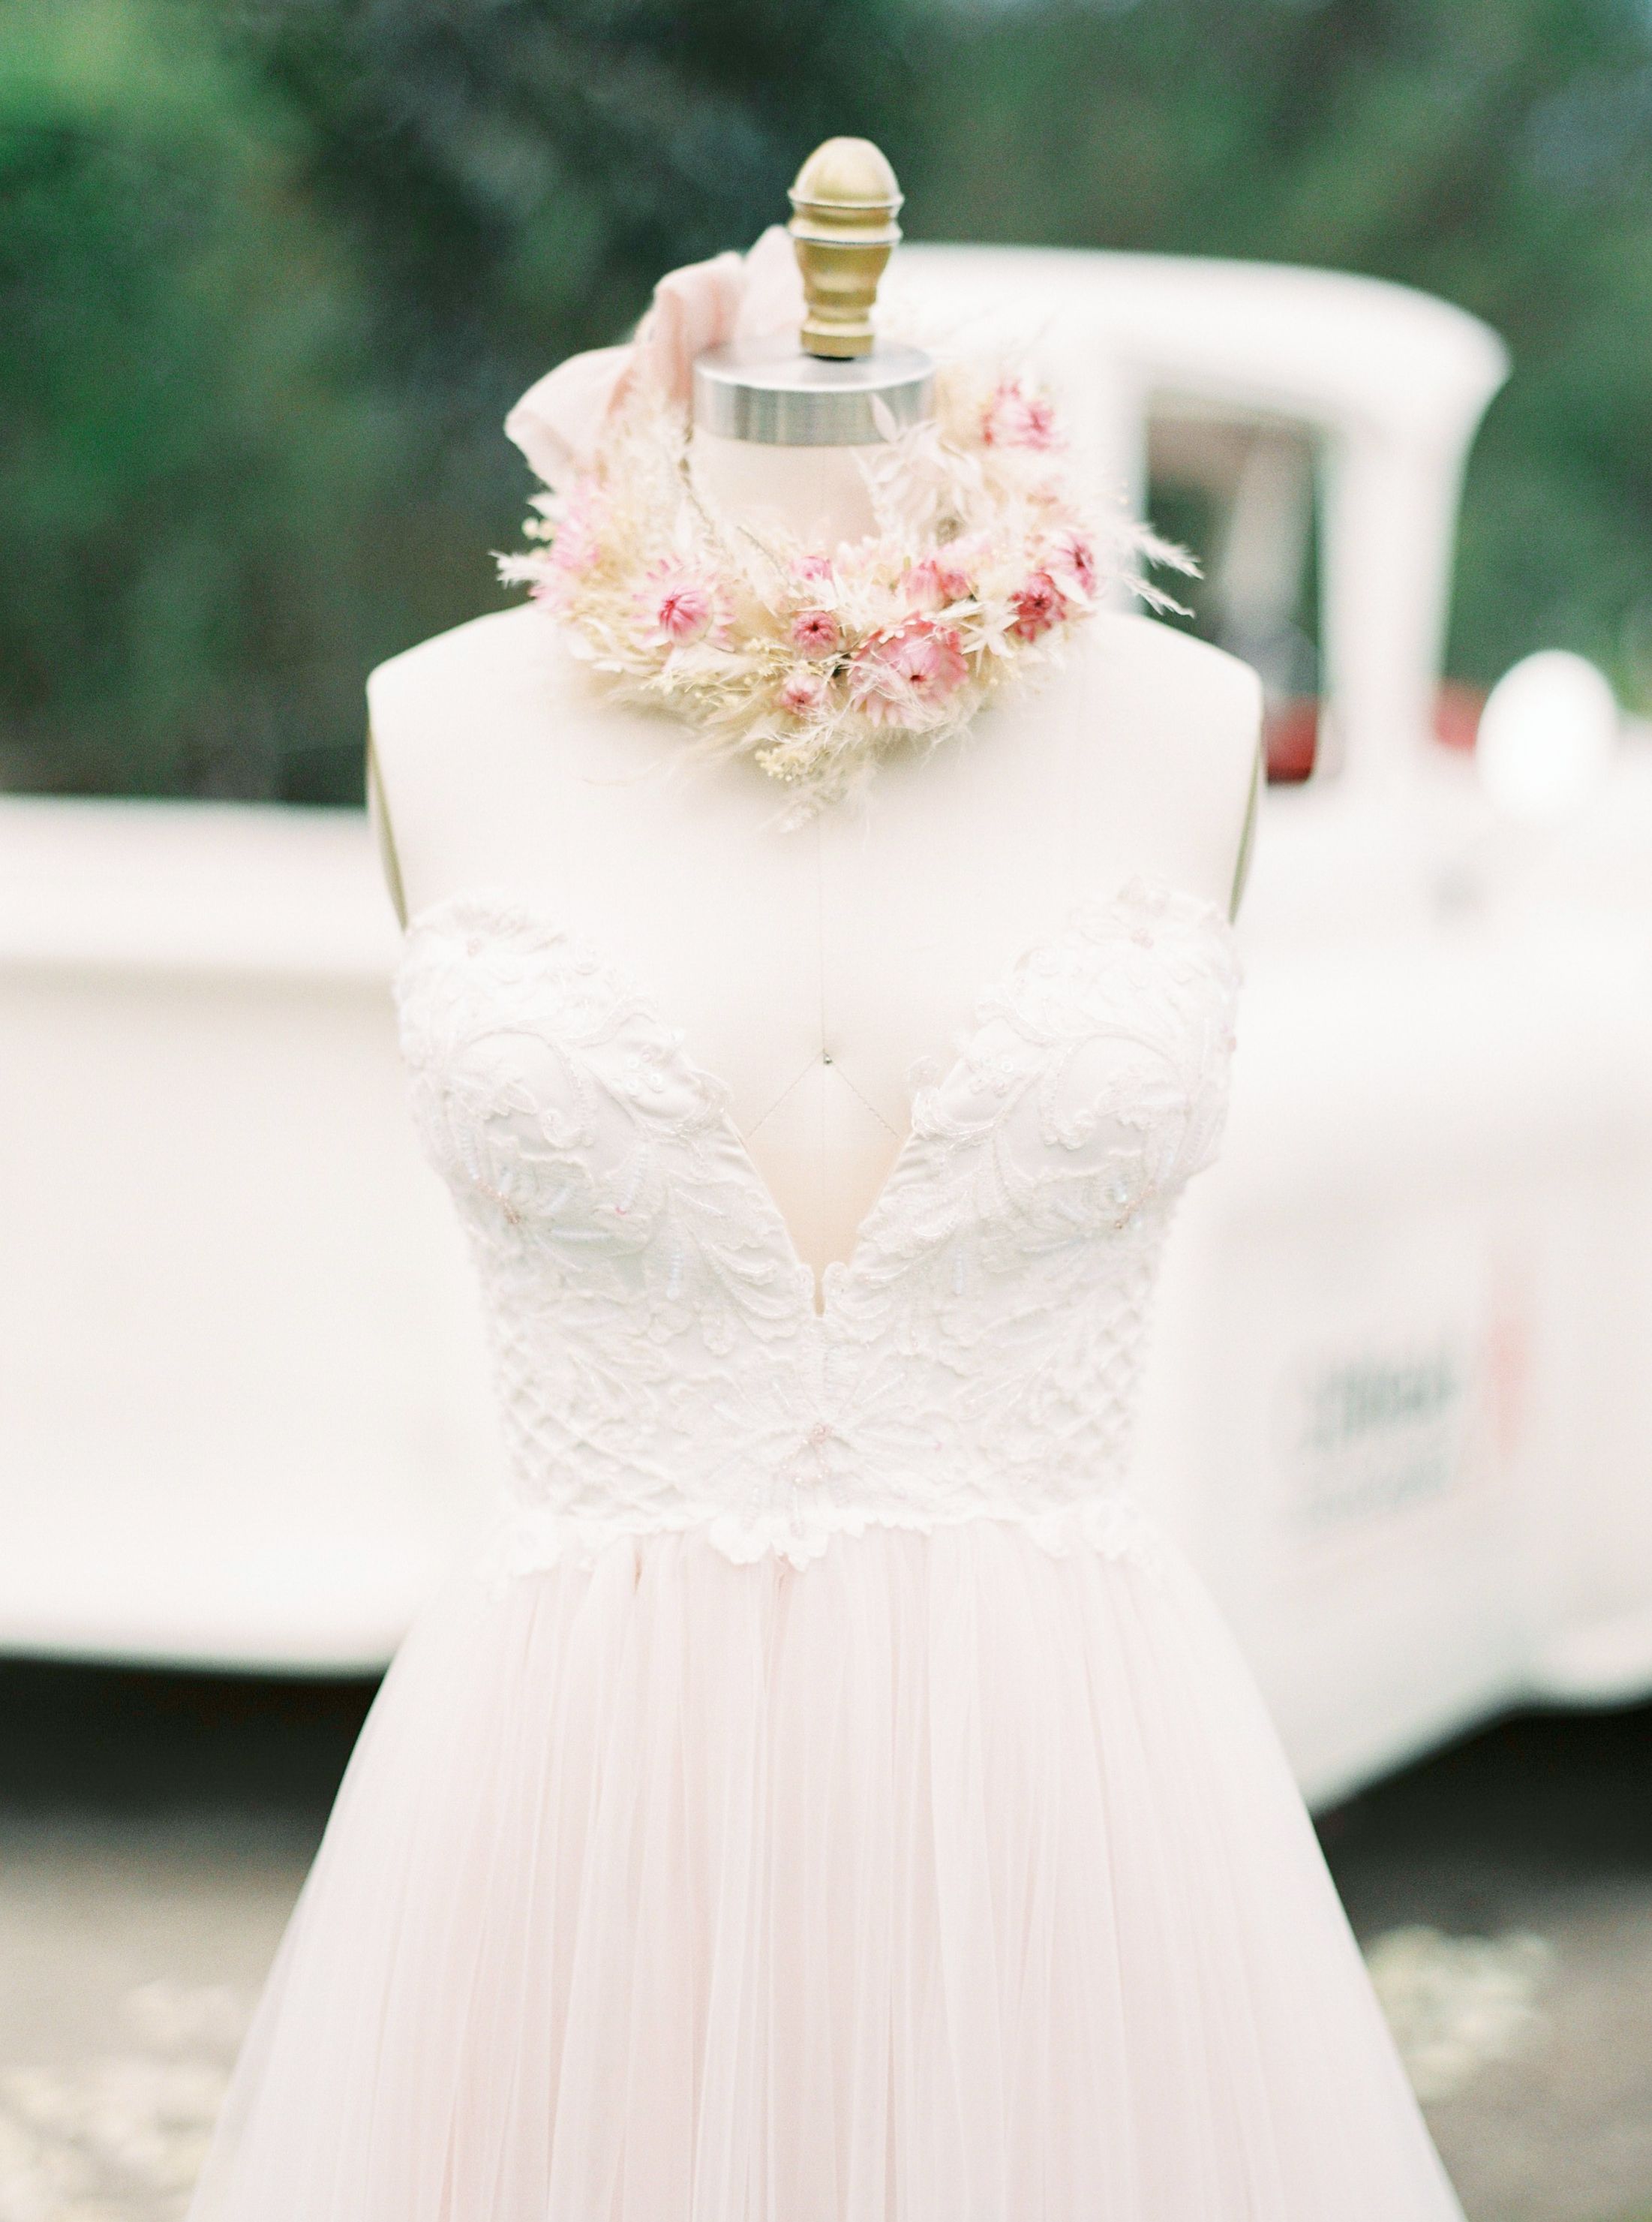 Ballerina style wedding dress and floral crown